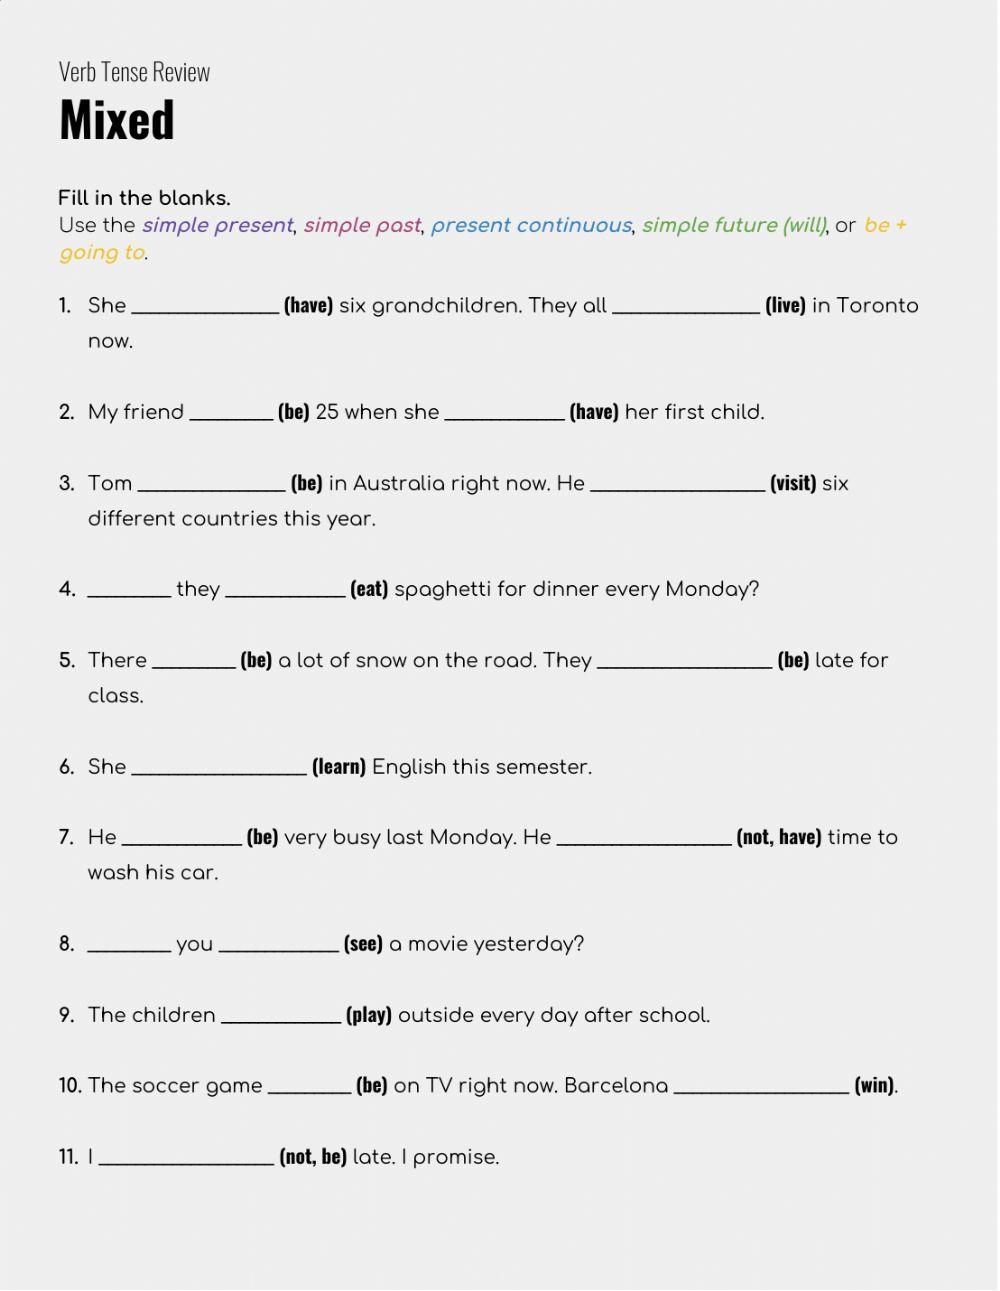 Verb Tenses Review - Mixed worksheet | Live Worksheets